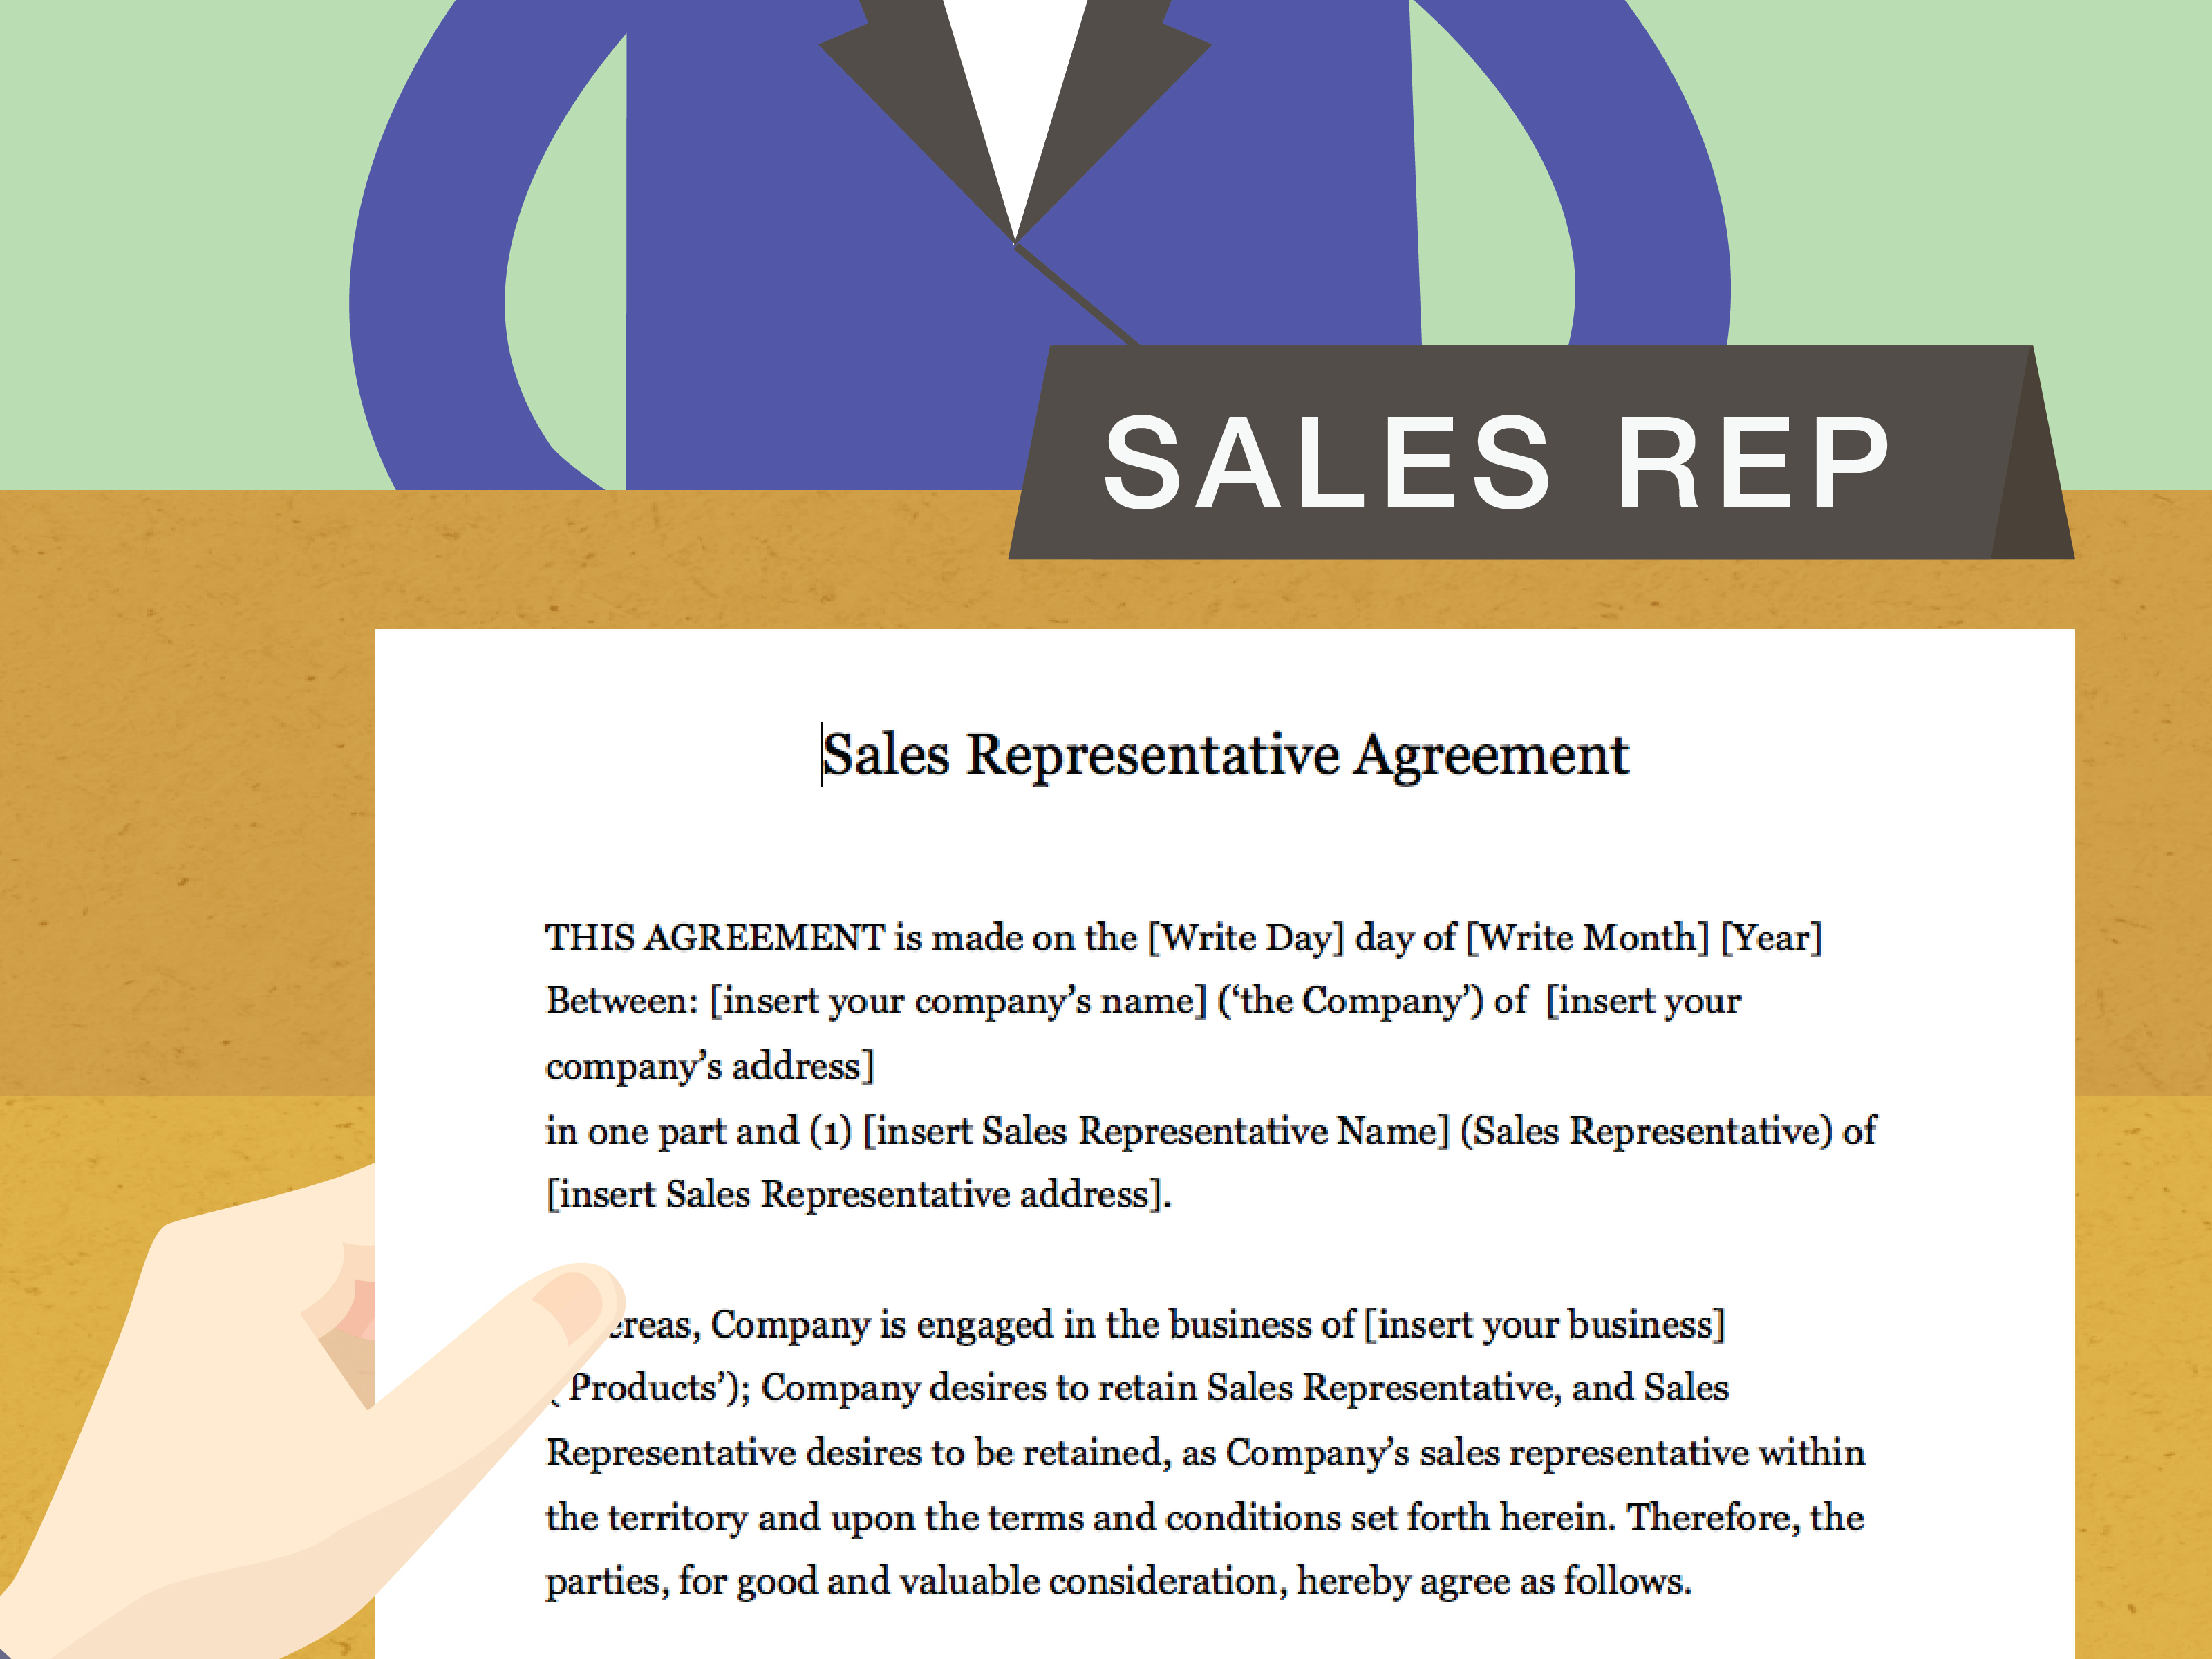 Sales Representative Agreement How To Draft A Sales Representative Agreement With Pictures